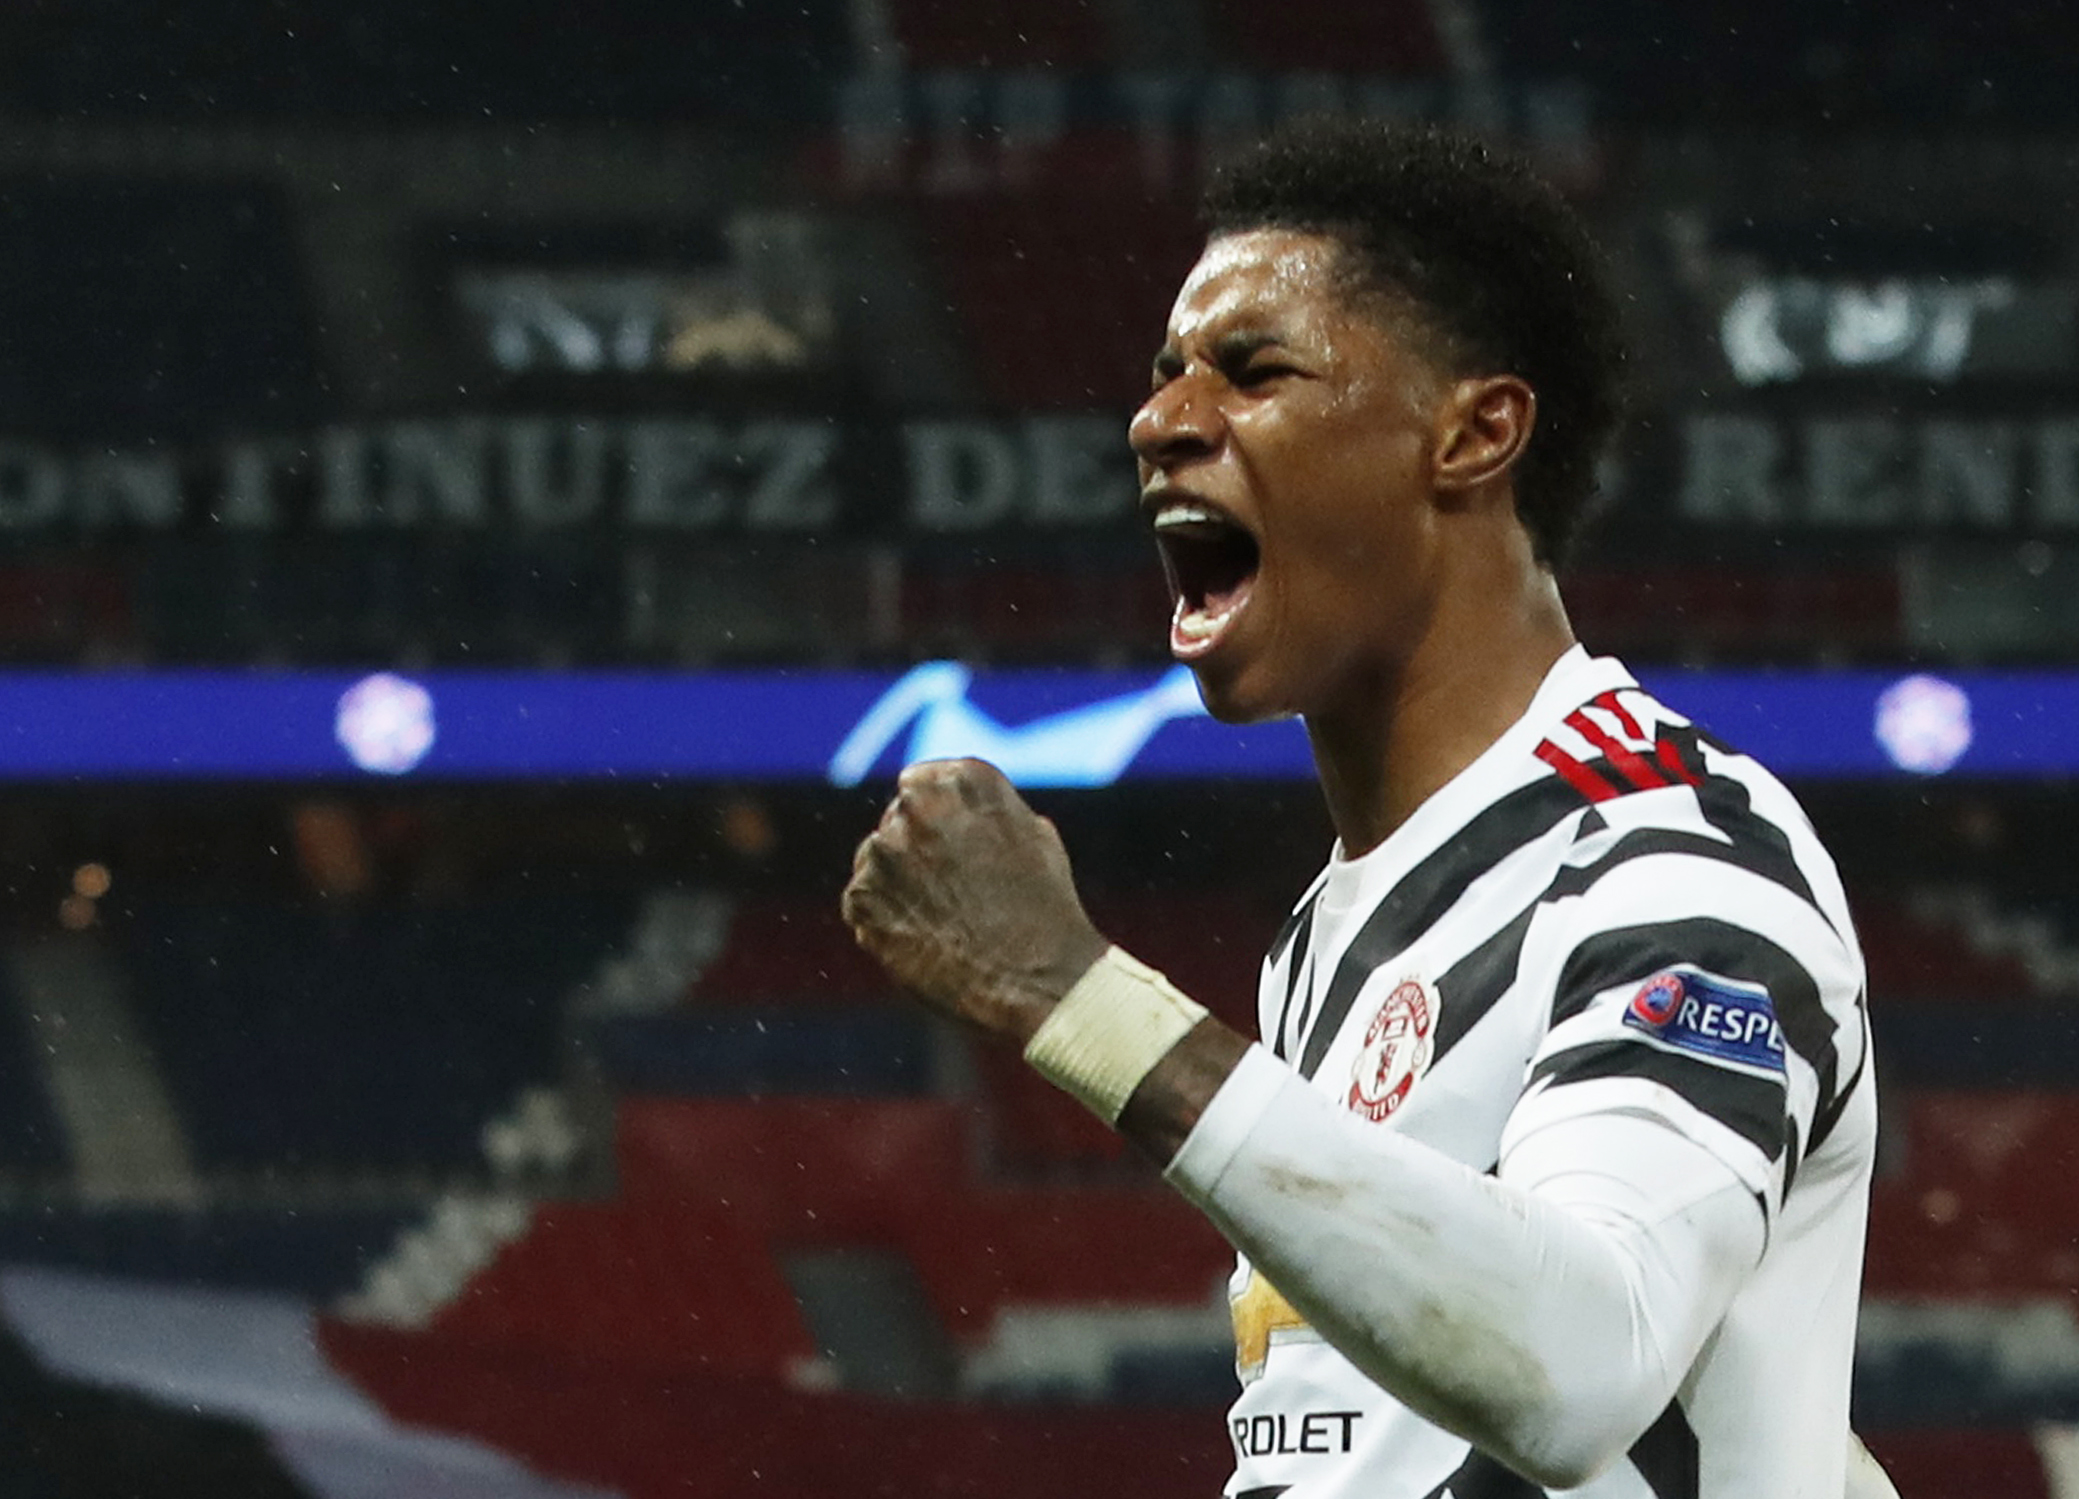 Manchester United's Marcus Rashford celebrates scoring their second goal  during the Champions League Group H match between Paris St Germain and Manchester United, at Parc des Princes, in Paris, France, on October 20, 2020. Photo: Reuters